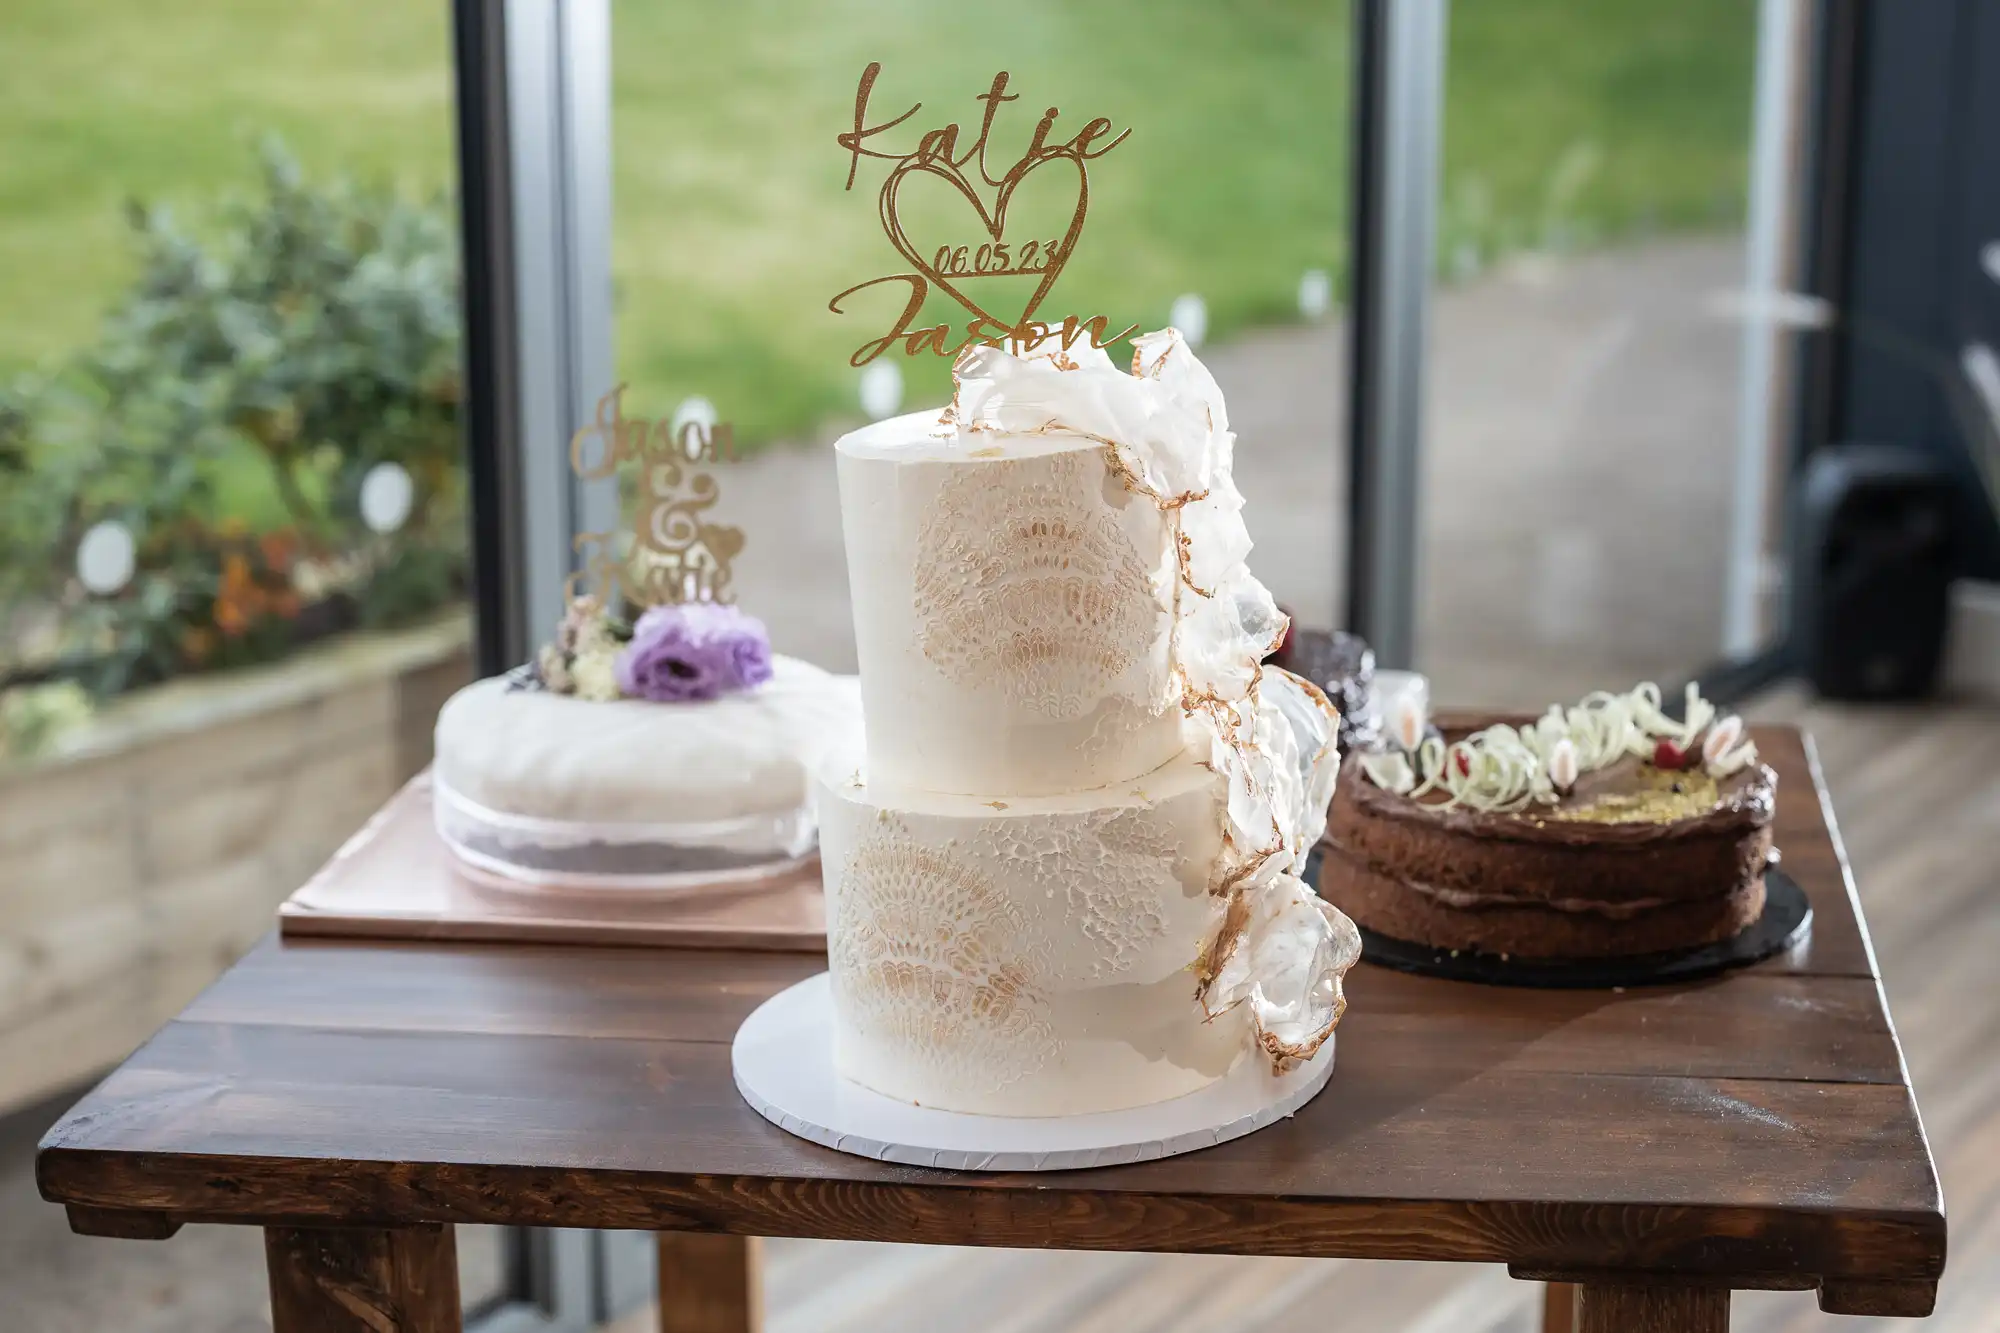 An elegantly decorated wedding cake with "Katie & Jason, 16-05-23" topper. Additional cakes are on the same table. The background features a garden seen through windows.